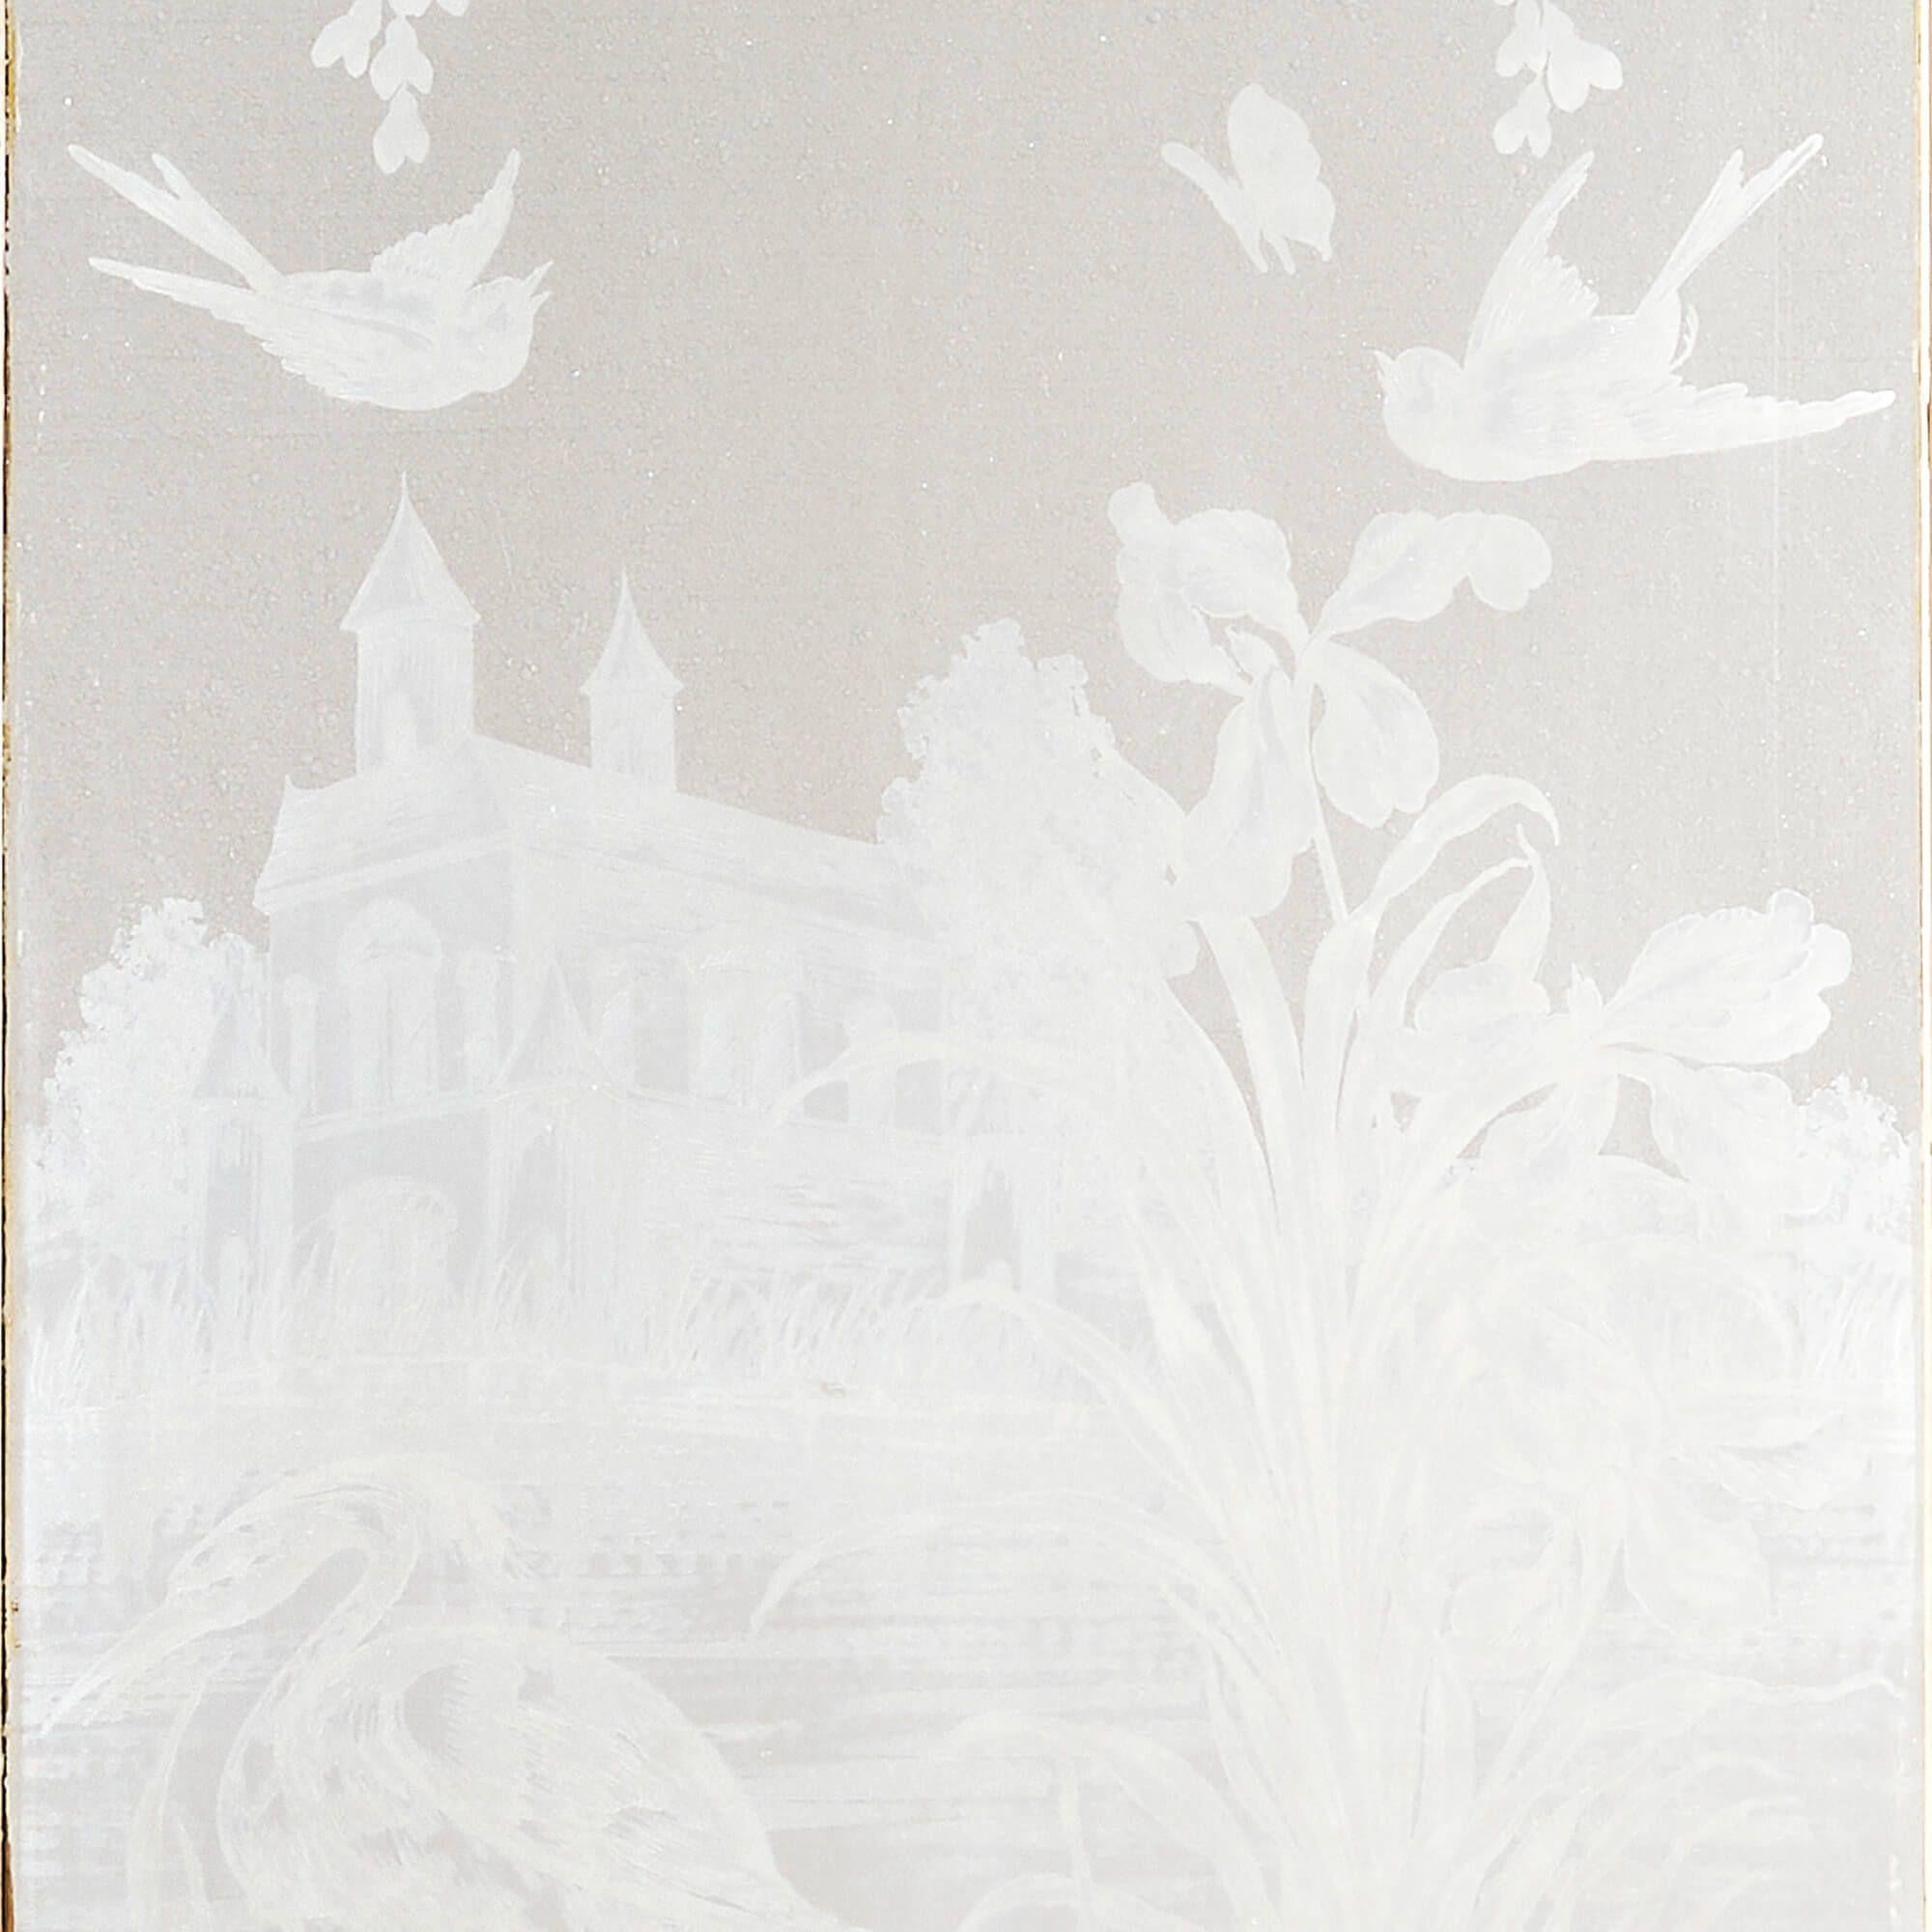 A set of 3 antique acid etched glass doors artistically glazed with an idyllic riverbank scene with birds, crane, foliage, flowers and a church to the central pane. Constructed from pine, the doors are currently finished with old paint which is